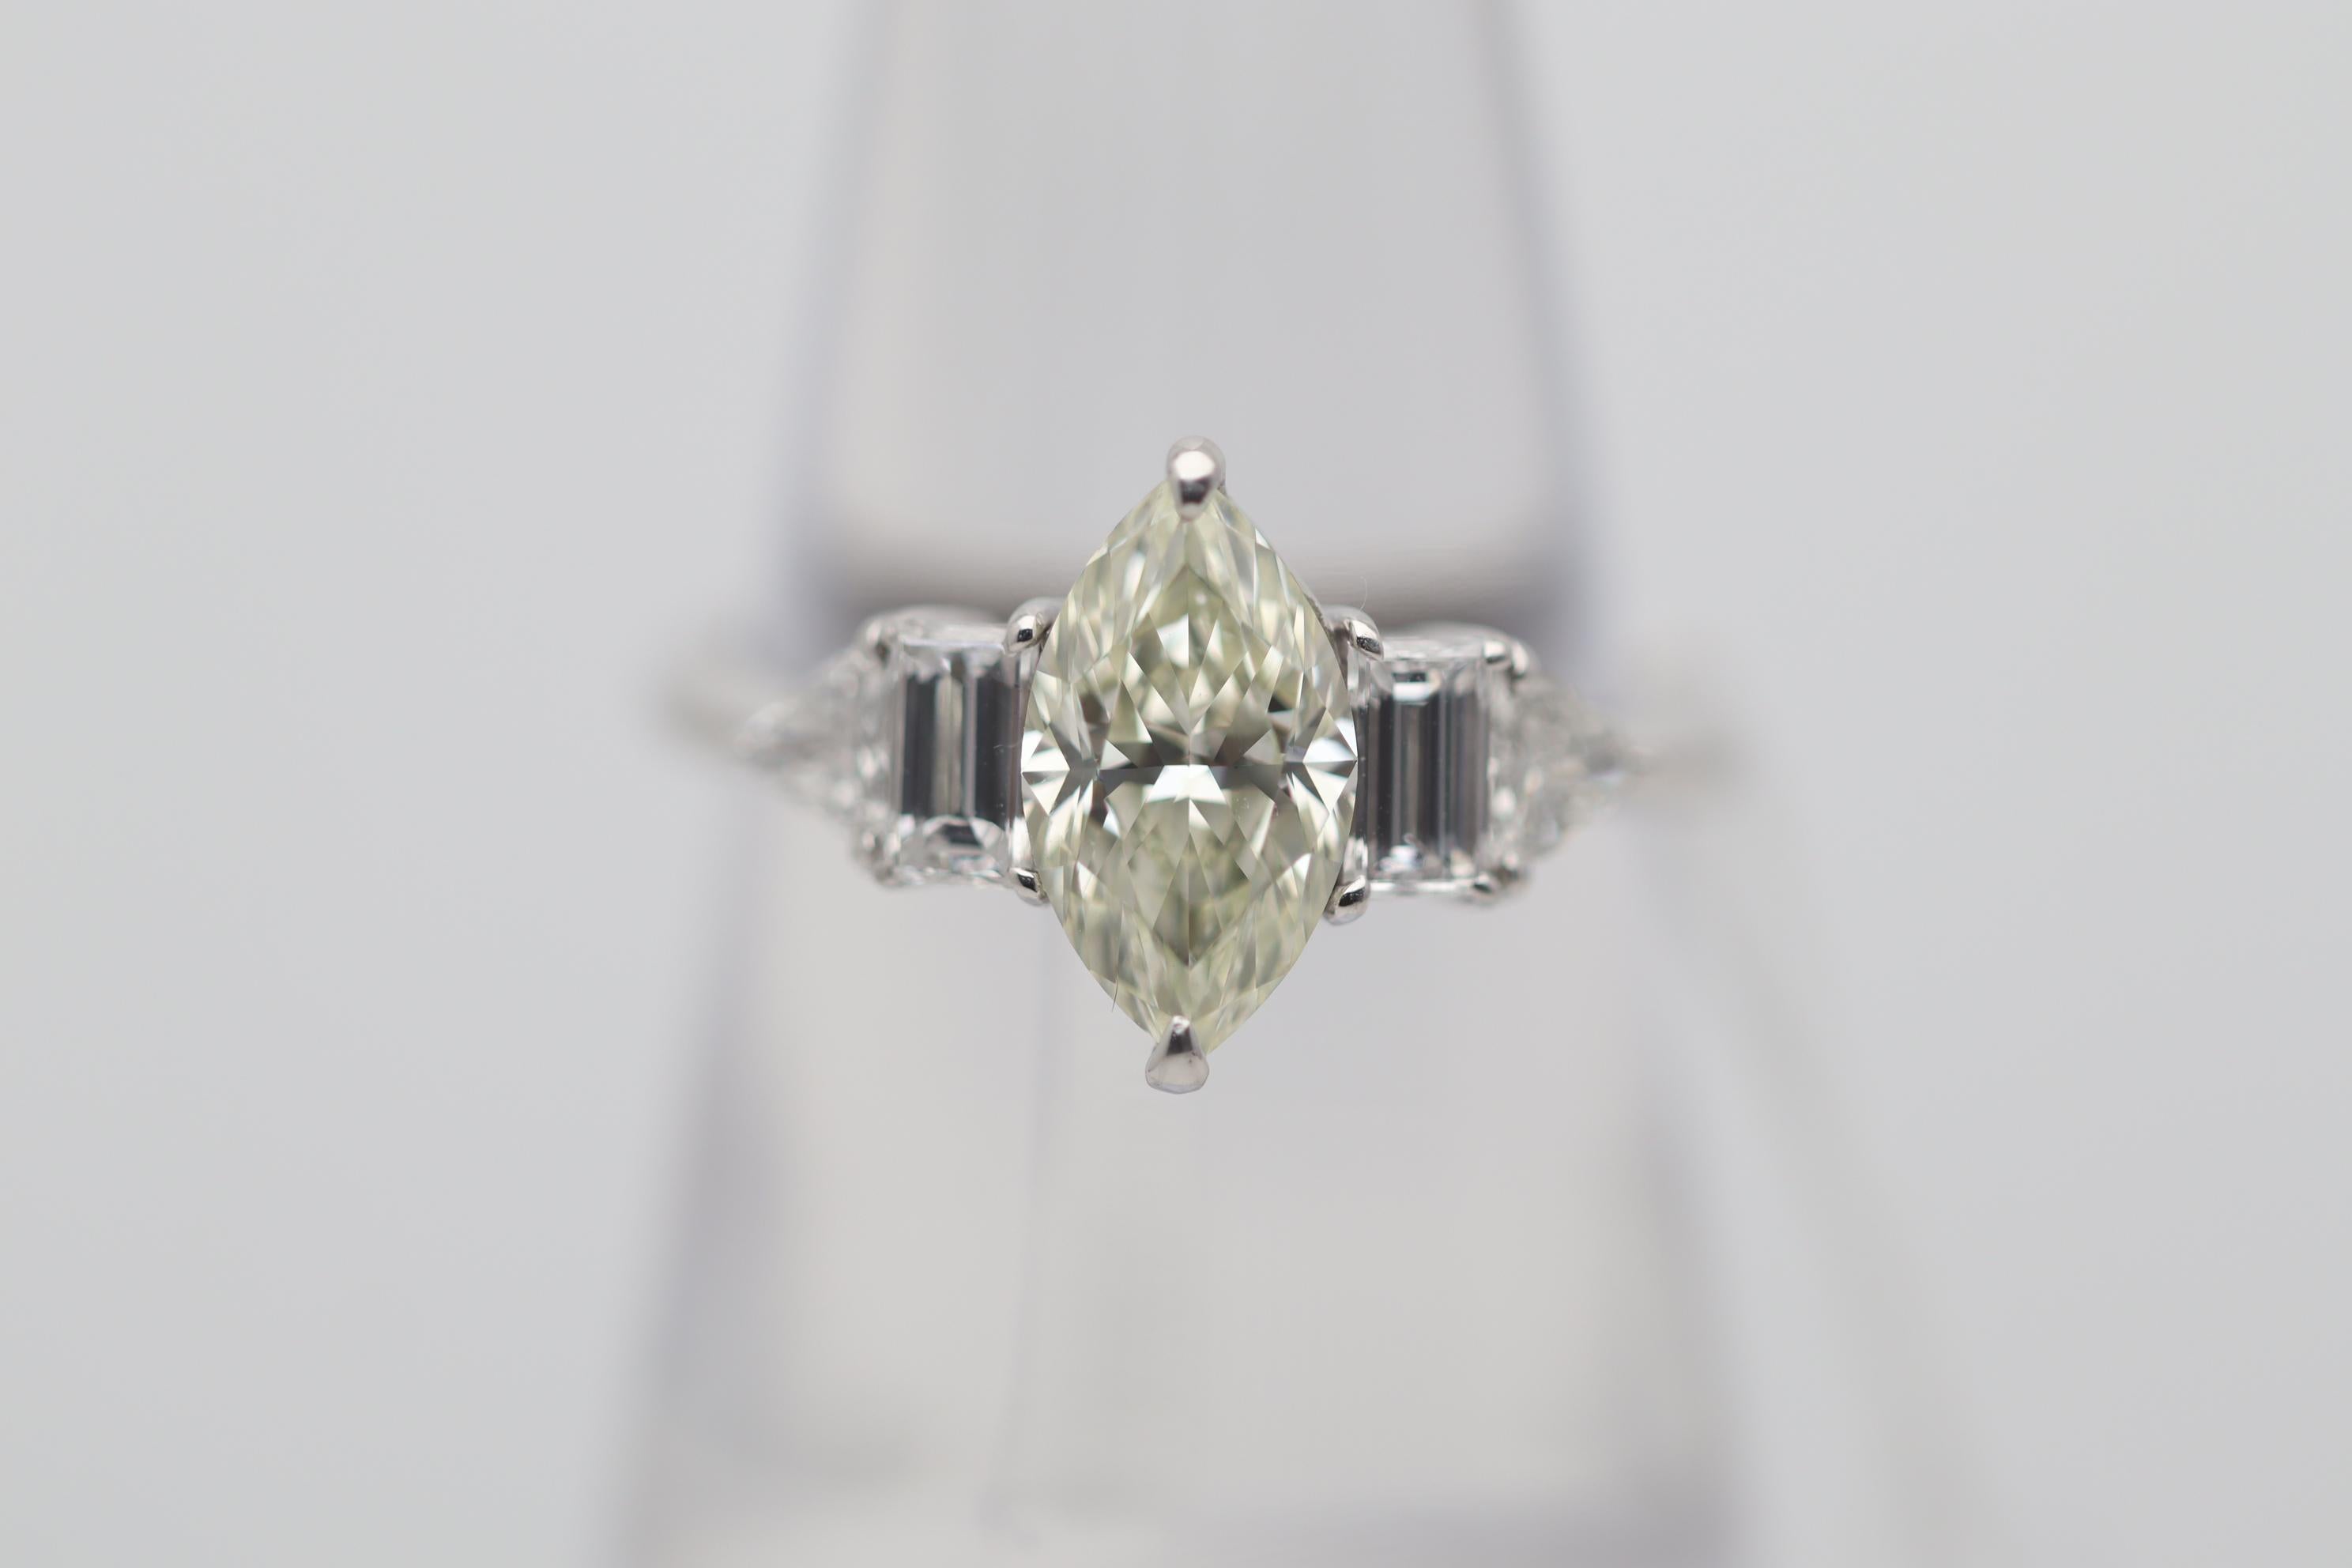 A lovely engagement ring featuring a 1.38 carat marquise-shape diamond. The marquise diamond has a fancy light yellow color which is even and makes the diamond appear to glow! Adding to that it has a clarity grade of VS2 making the stone clean